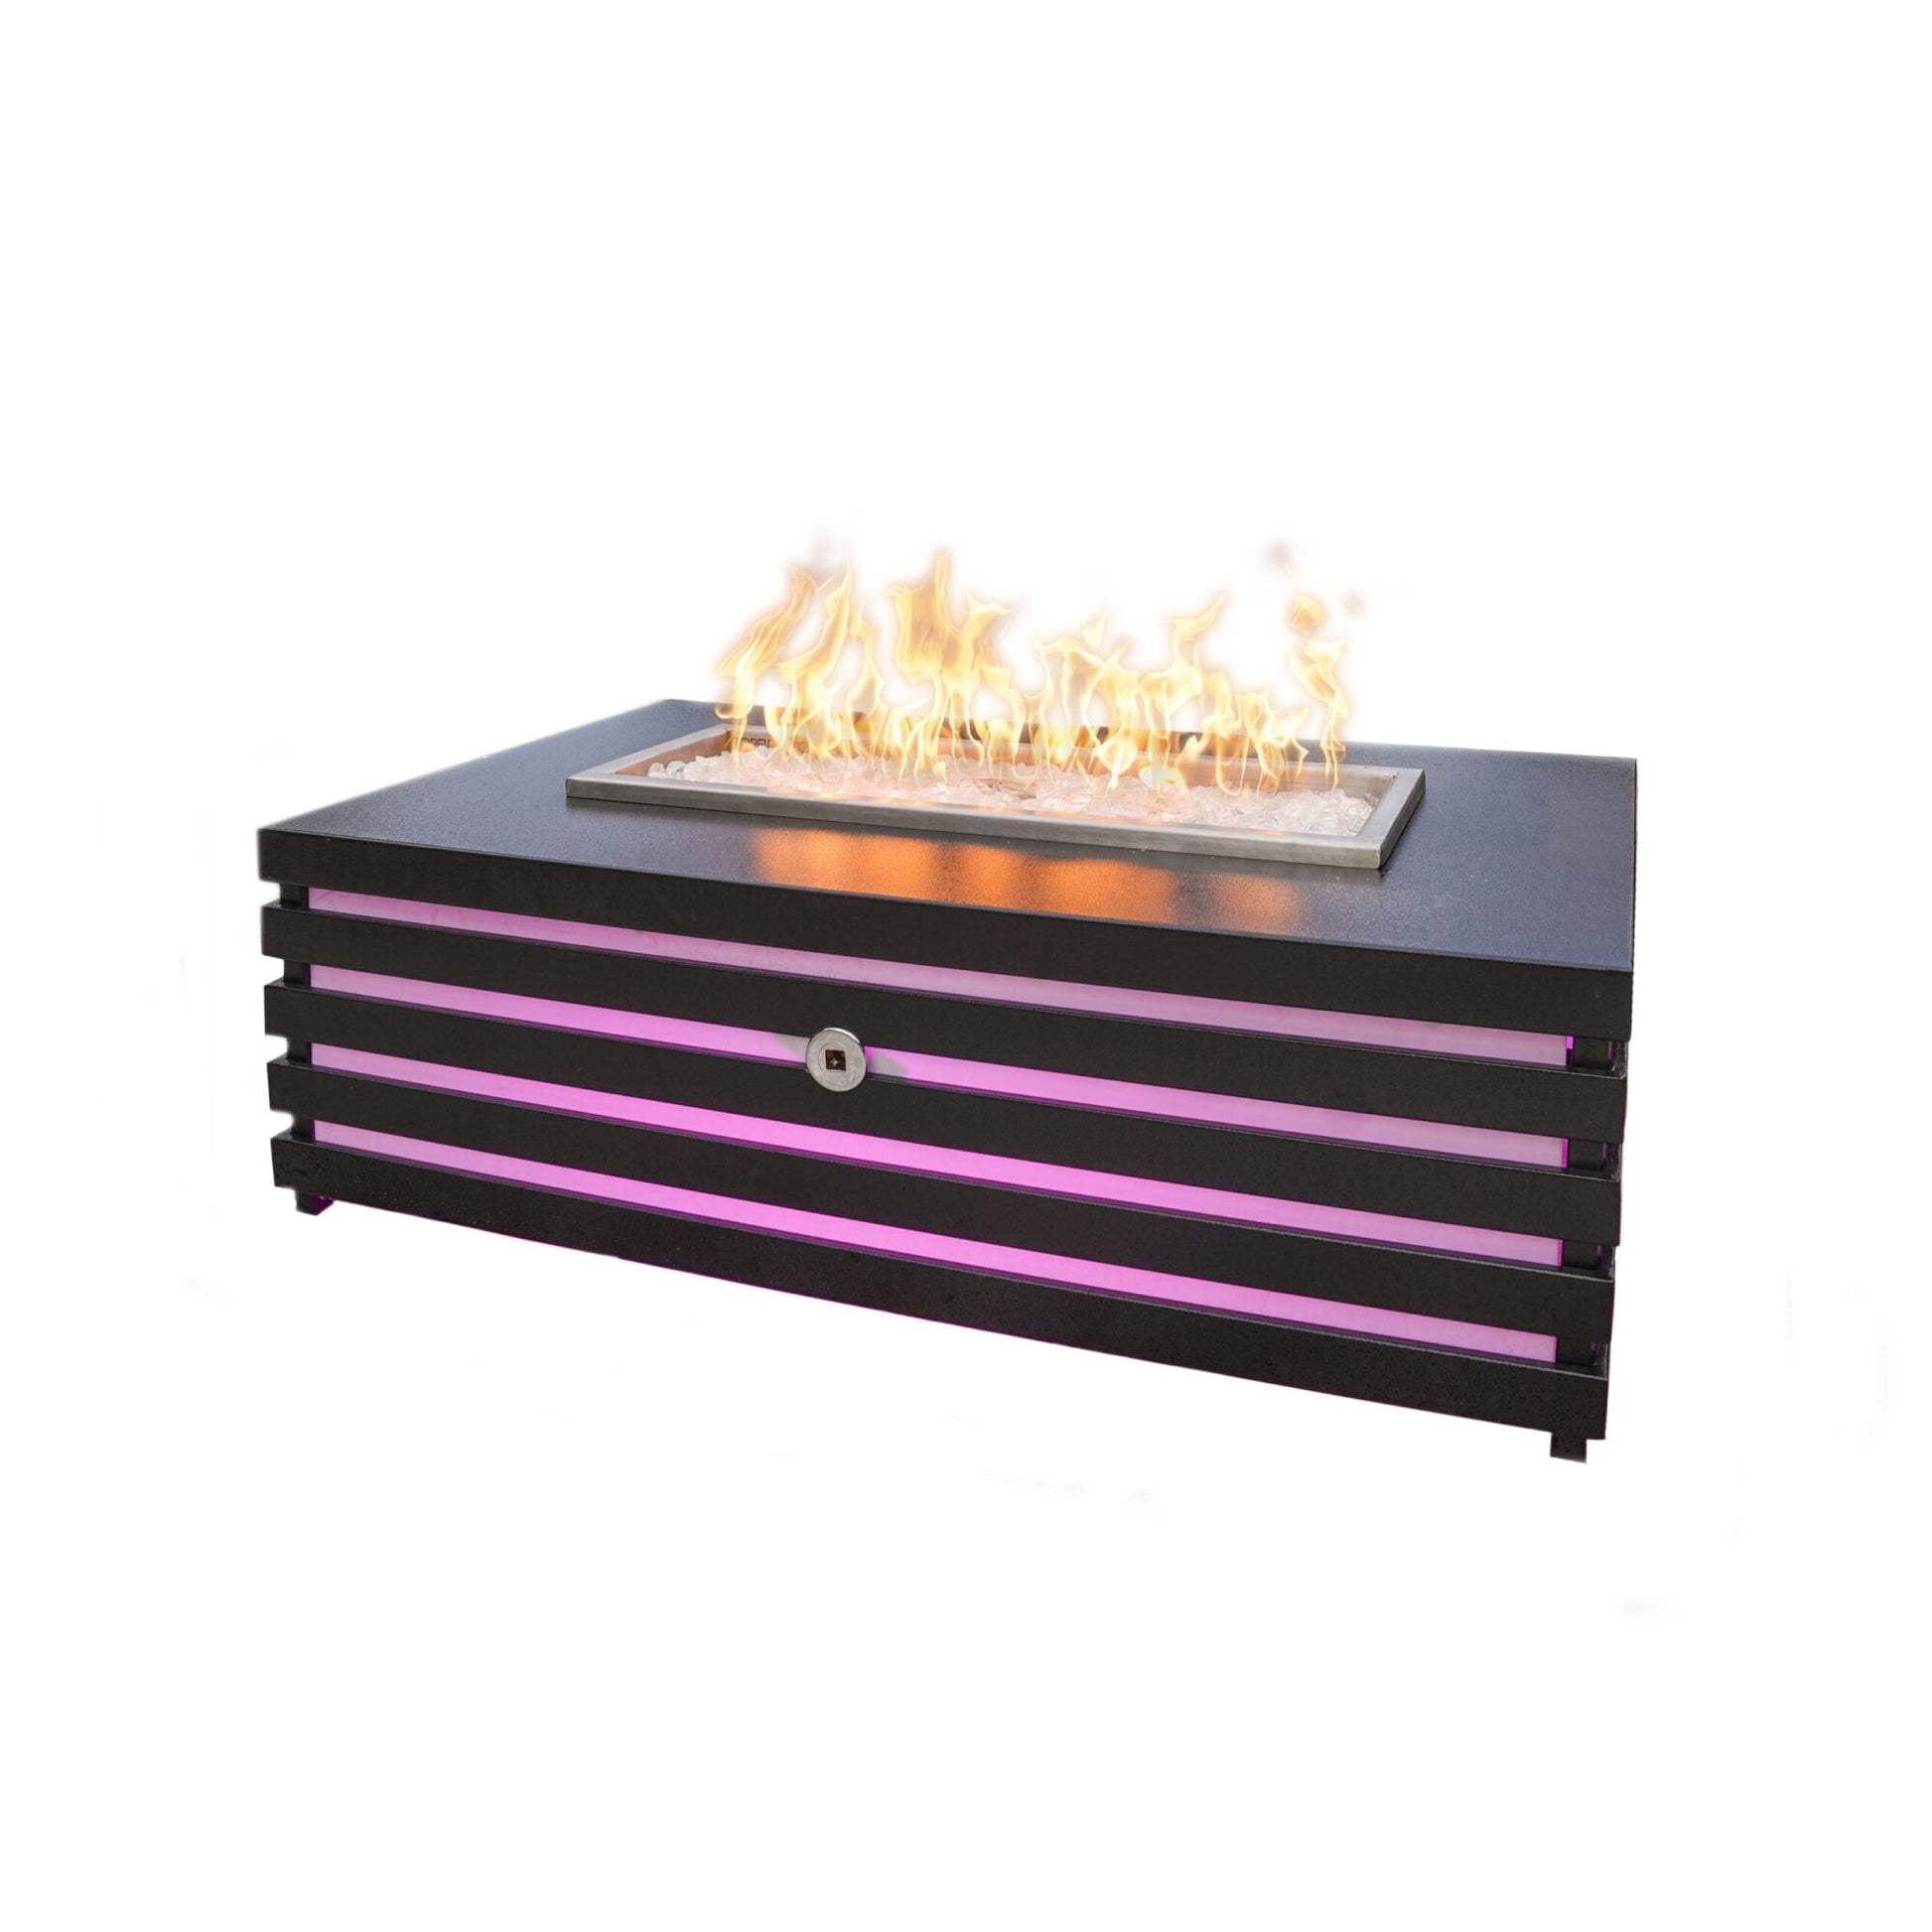 The Outdoor Plus Amina 48" Black Powder Coated Liquid Propane Fire Pit with 110V Electronic Ignition